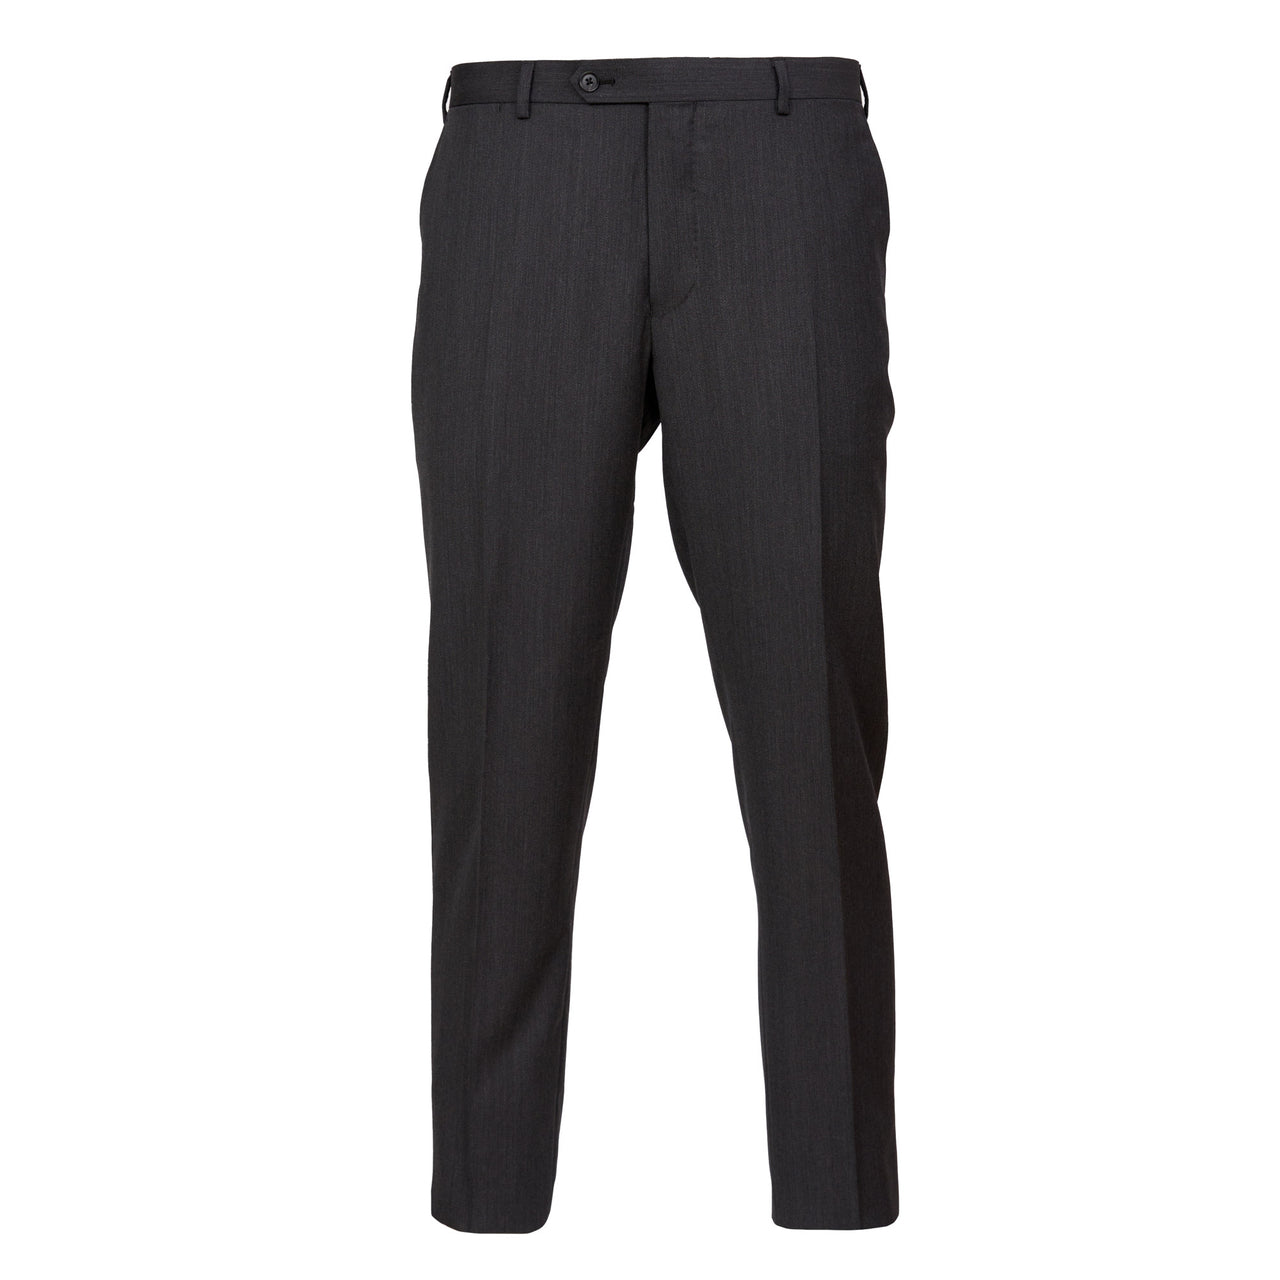 HENRY SARTORIAL Flat Front Twill Wool Trousers CHARCOAL REG